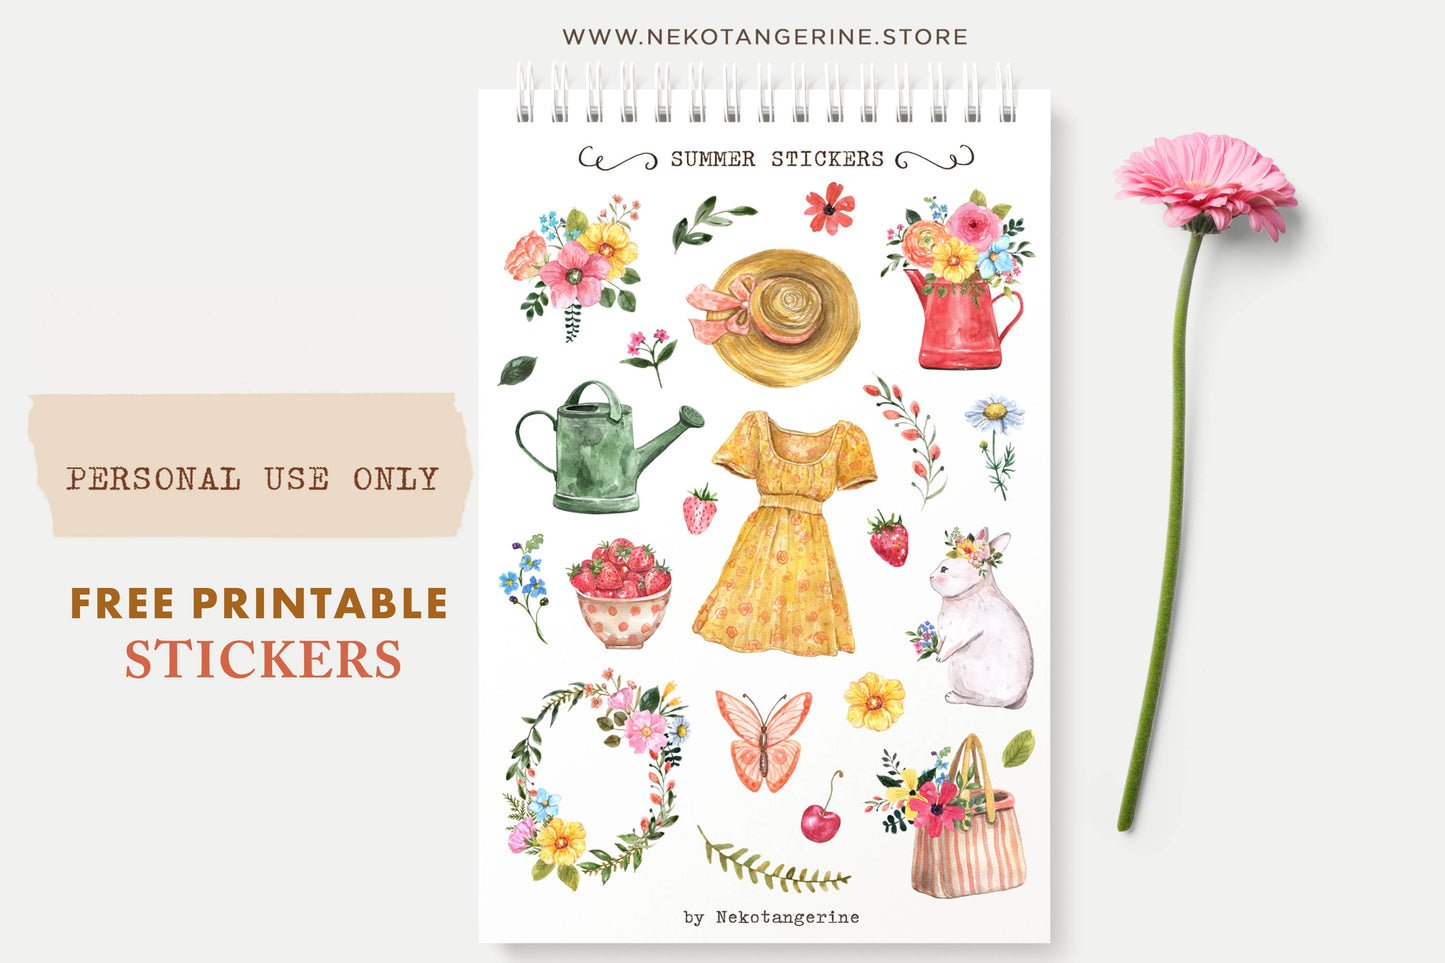 free printable summer stickers cottagecore july personal use only by nekotangerine sticker kit